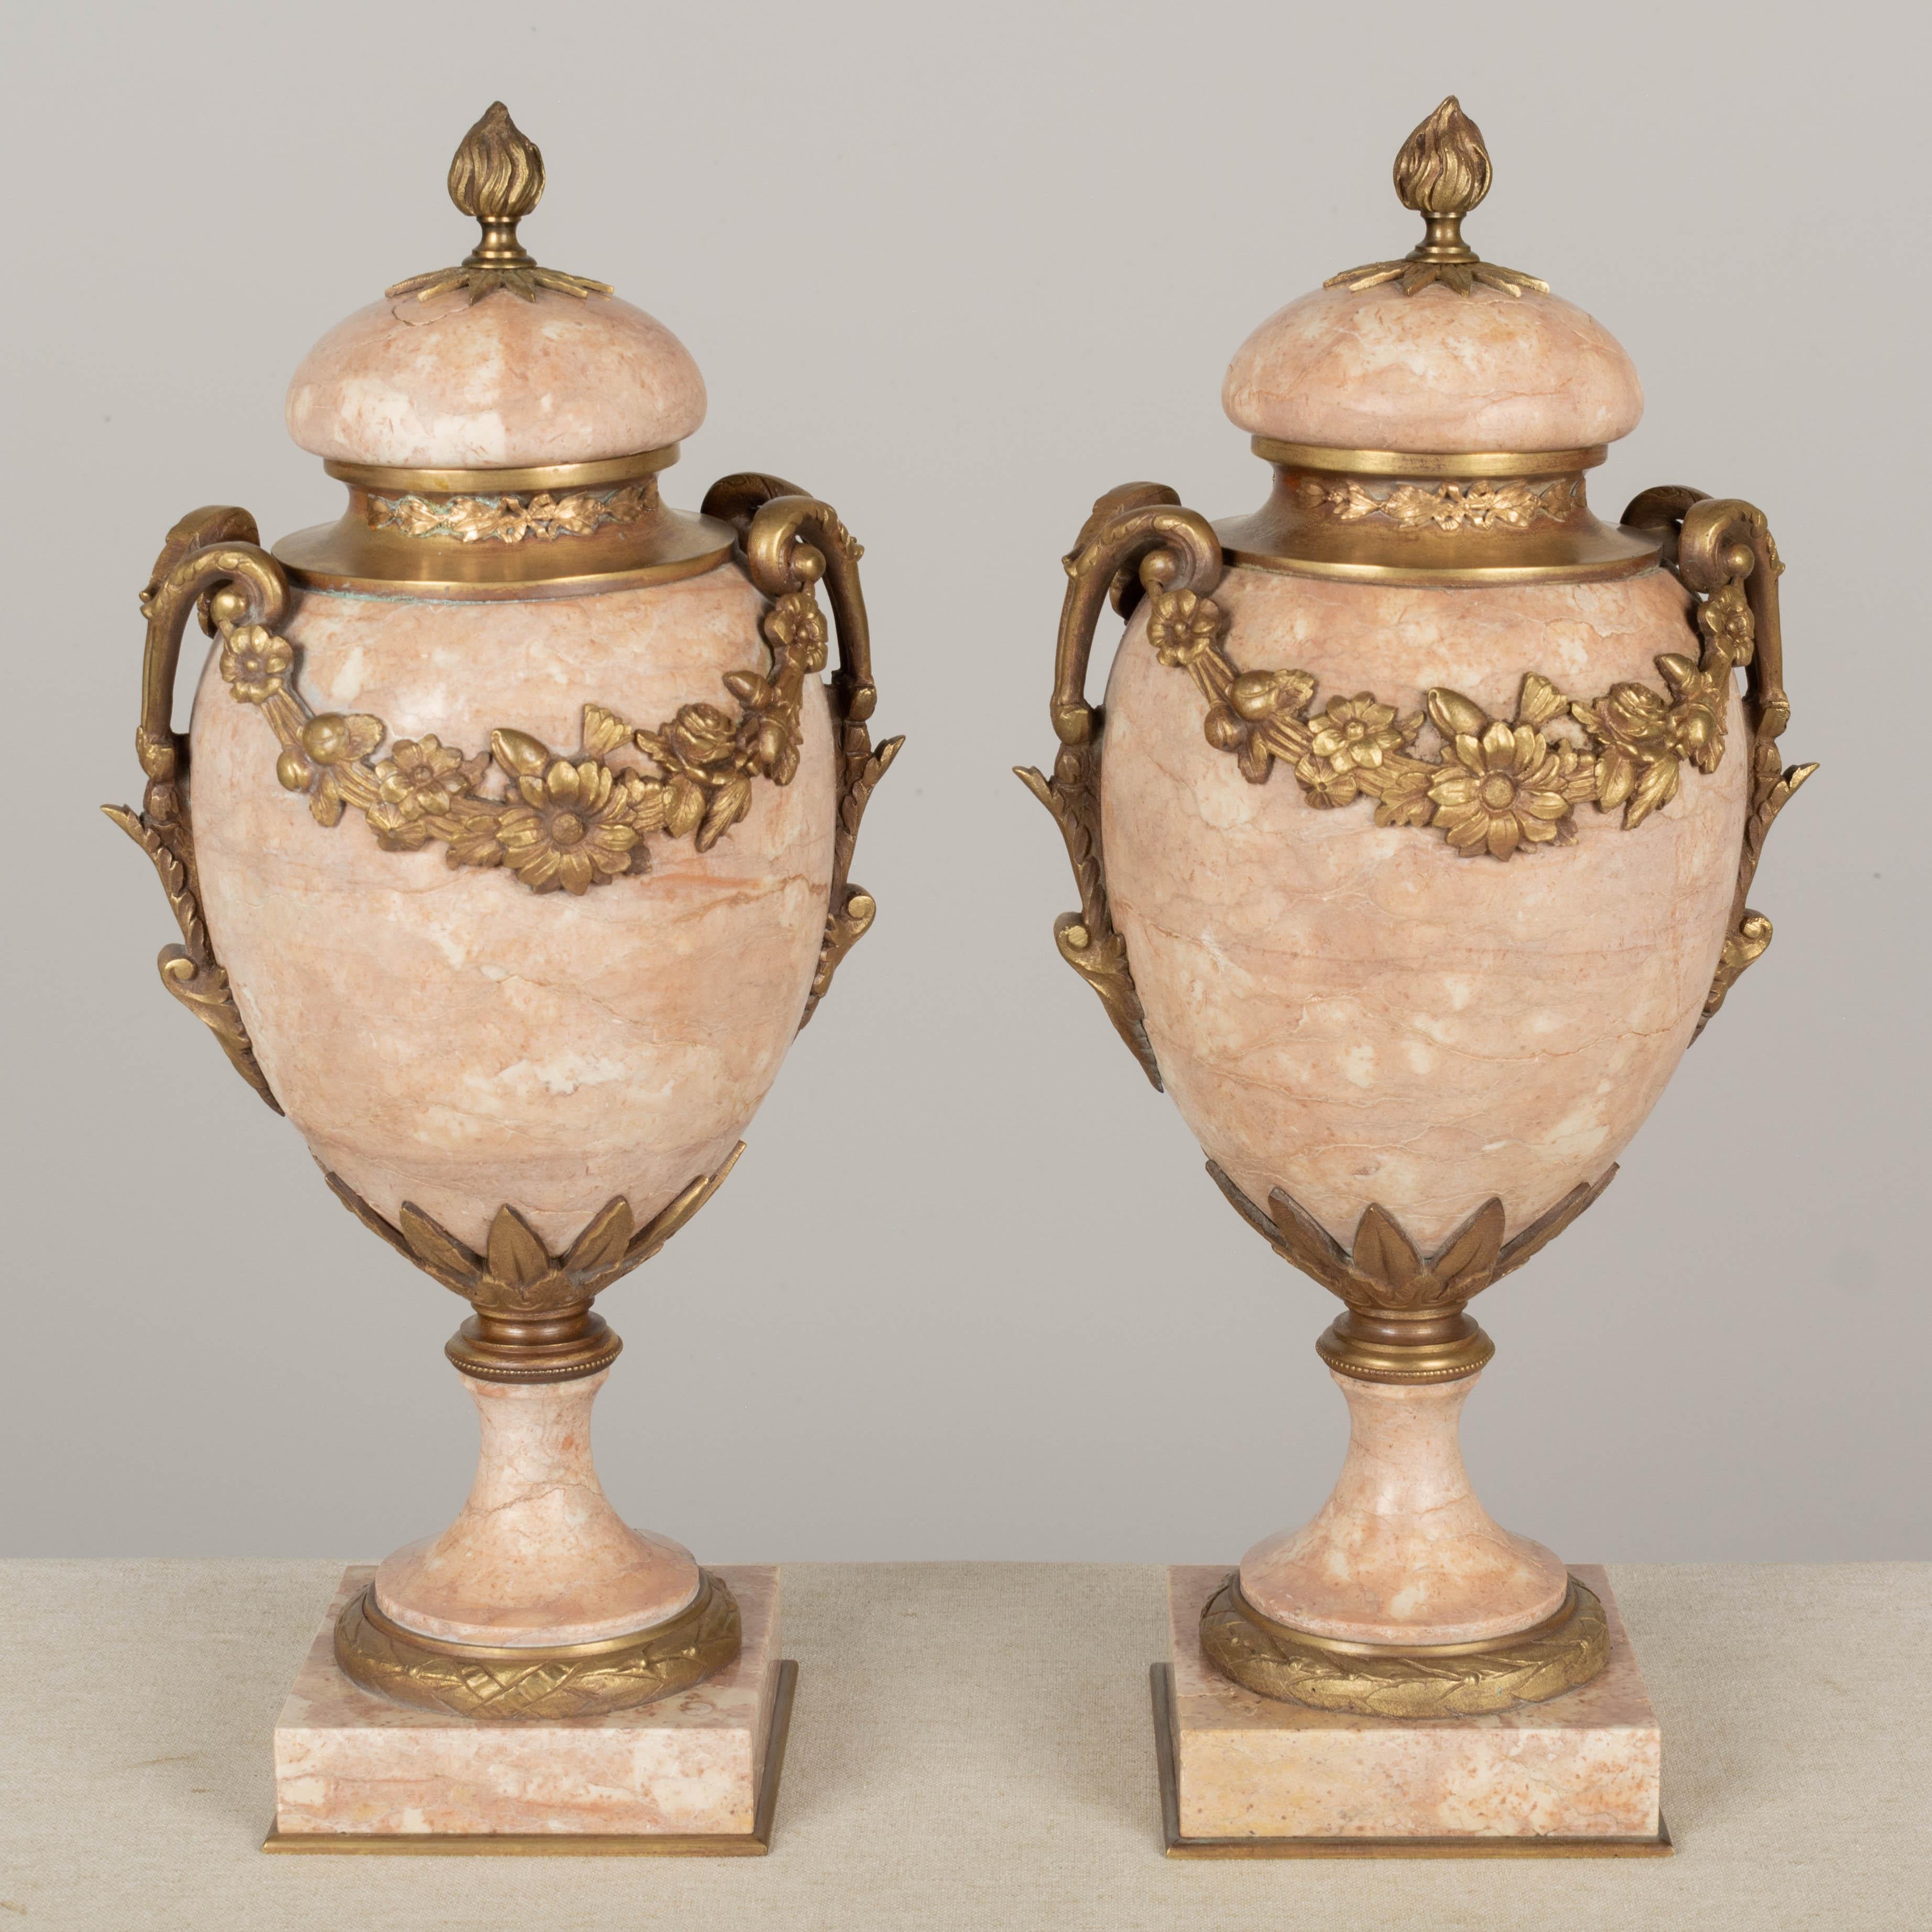 Cast 19th Century French Marble and Ormolu Cassolettes Pair For Sale